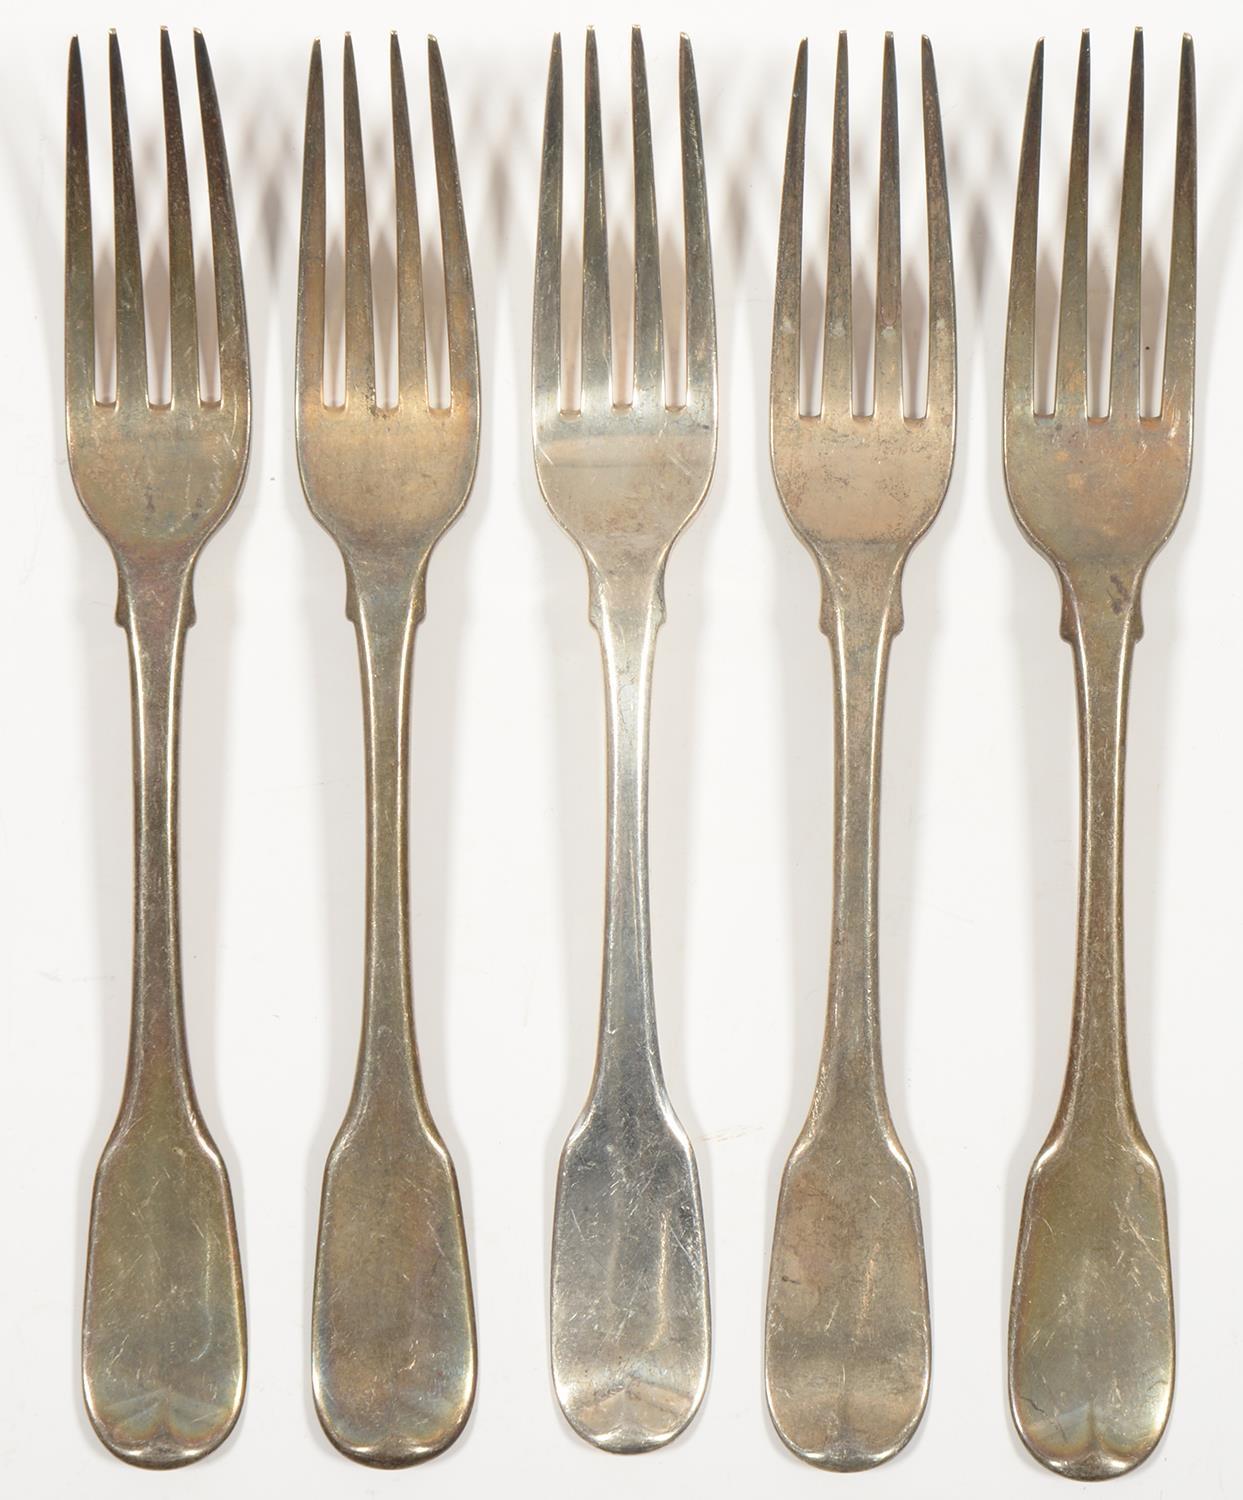 A SET OF FIVE GEORGE III SILVER TABLE FORKS, FIDDLE PATTERN, CRESTED, BY ELEY, FEARN & CHAWNER,